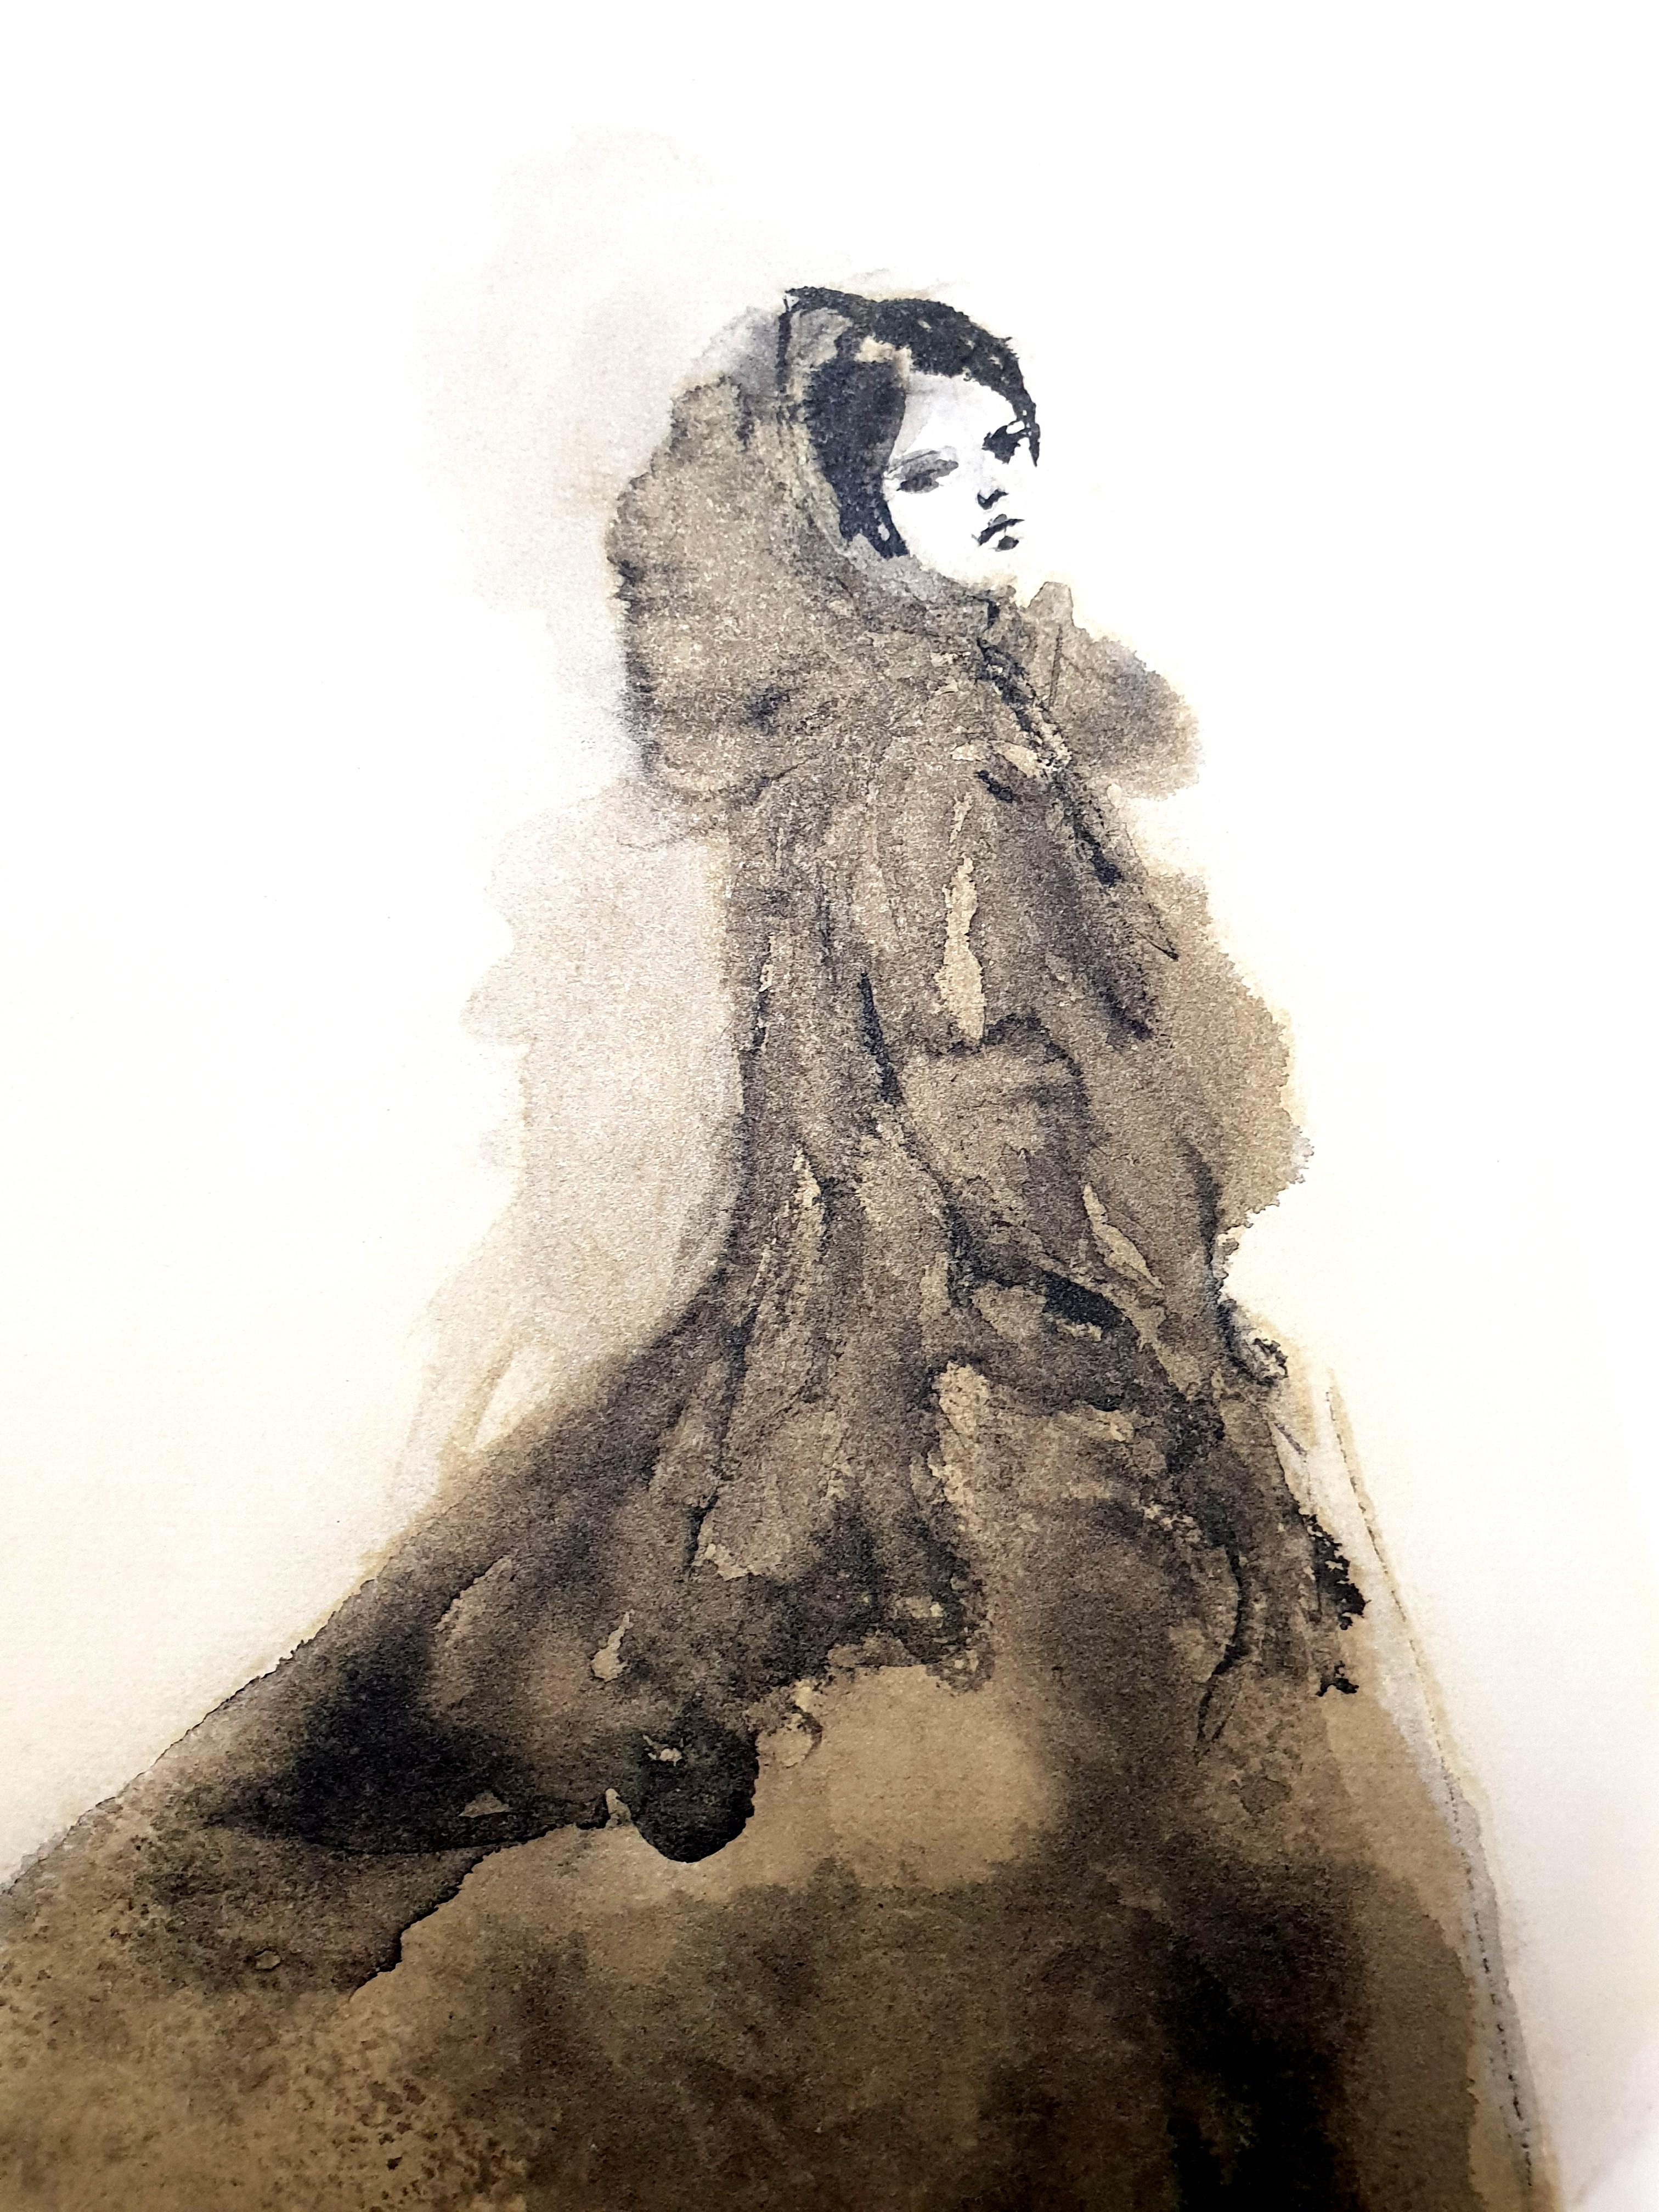 Leonor Fini - Saturday Night Dress - Original Lithograph
The Flowers of Evil
1964
Conditions: excellent
Edition: 500 
Dimensions: 46 x 34 cm 
Editions: Le Cercle du Livre Précieux, Paris
Unsigned and unumbered as issued